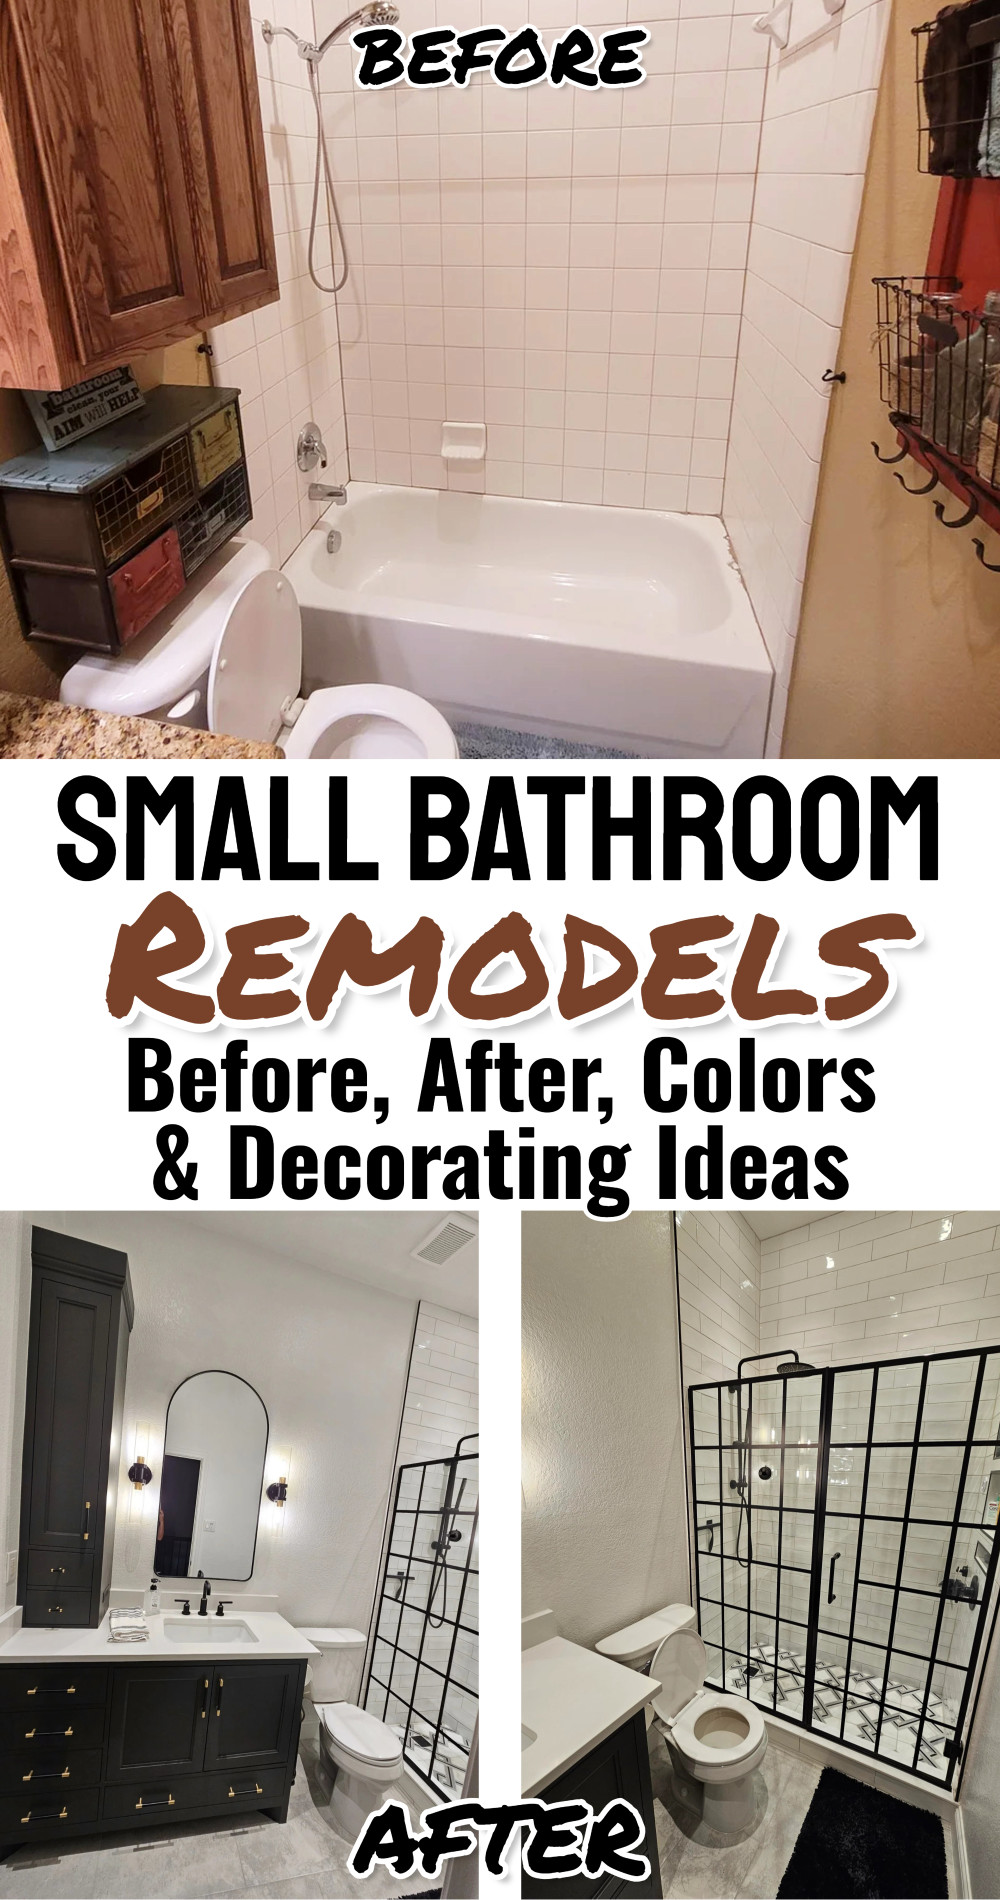 Small Bathroom Remodels - Before, After, Colors & Decorating Ideas (all on a budget!)